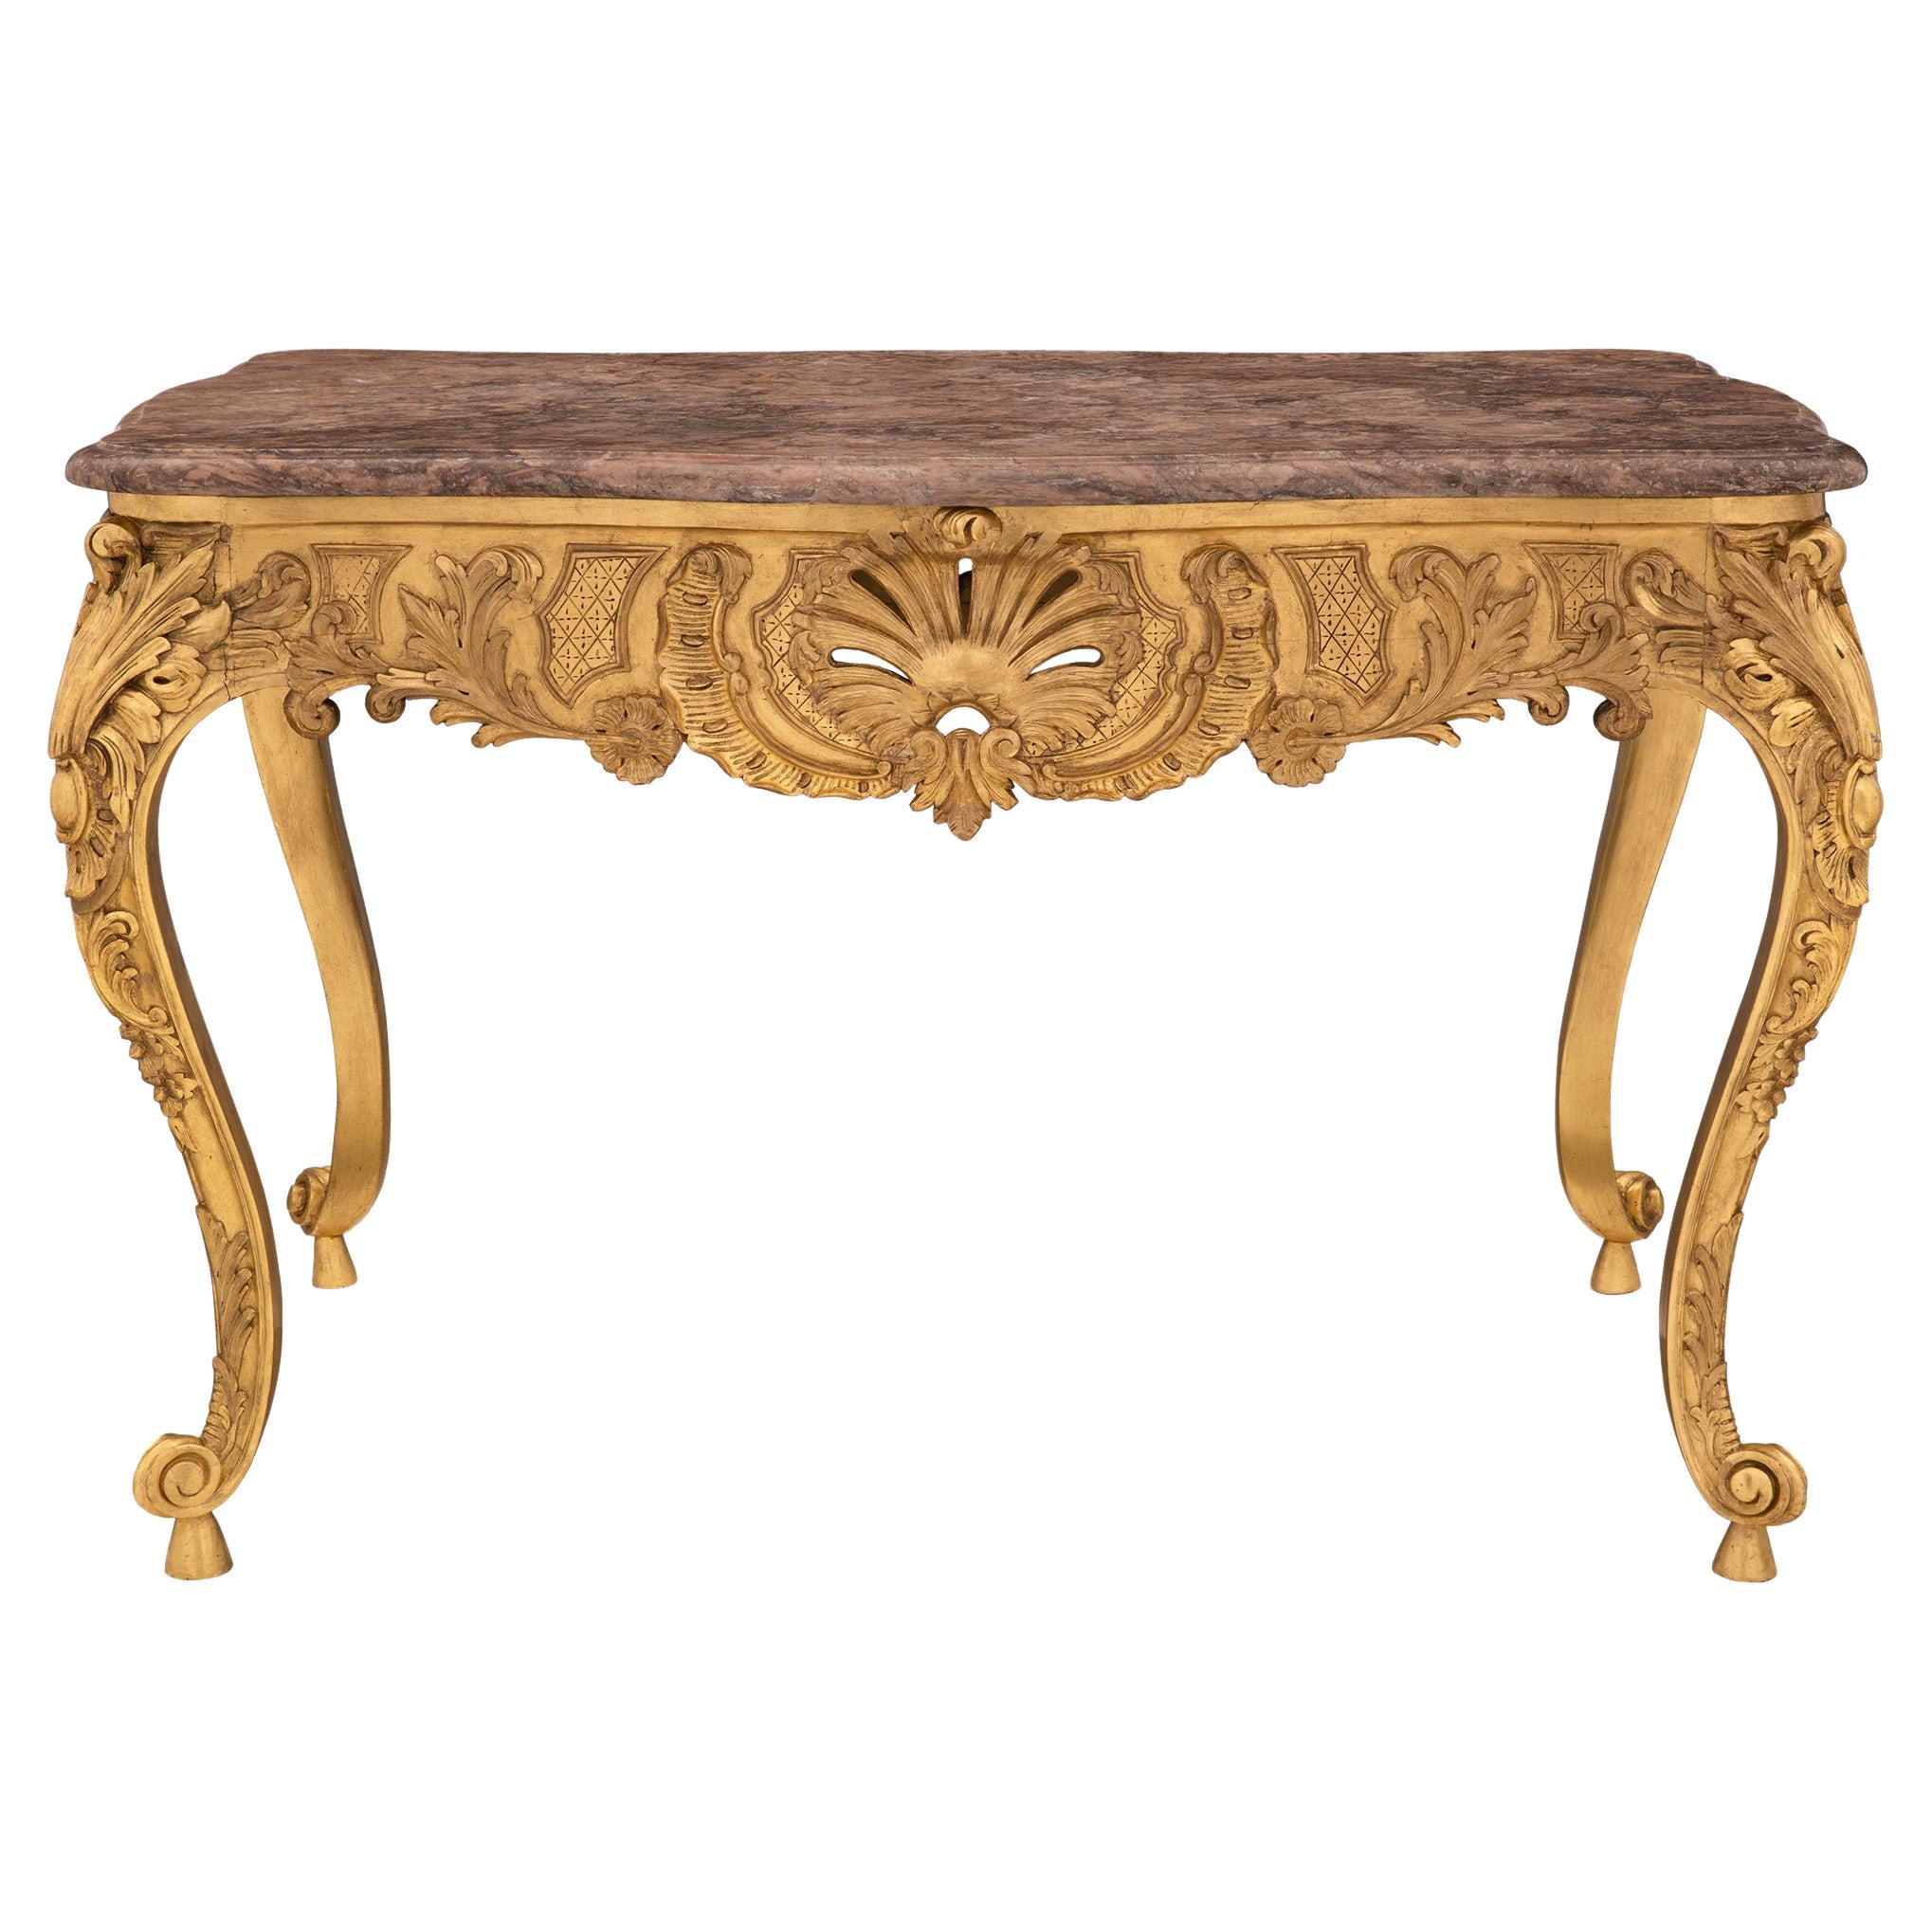 French 19th Century Louis XV Style Giltwood and Marble Center Table